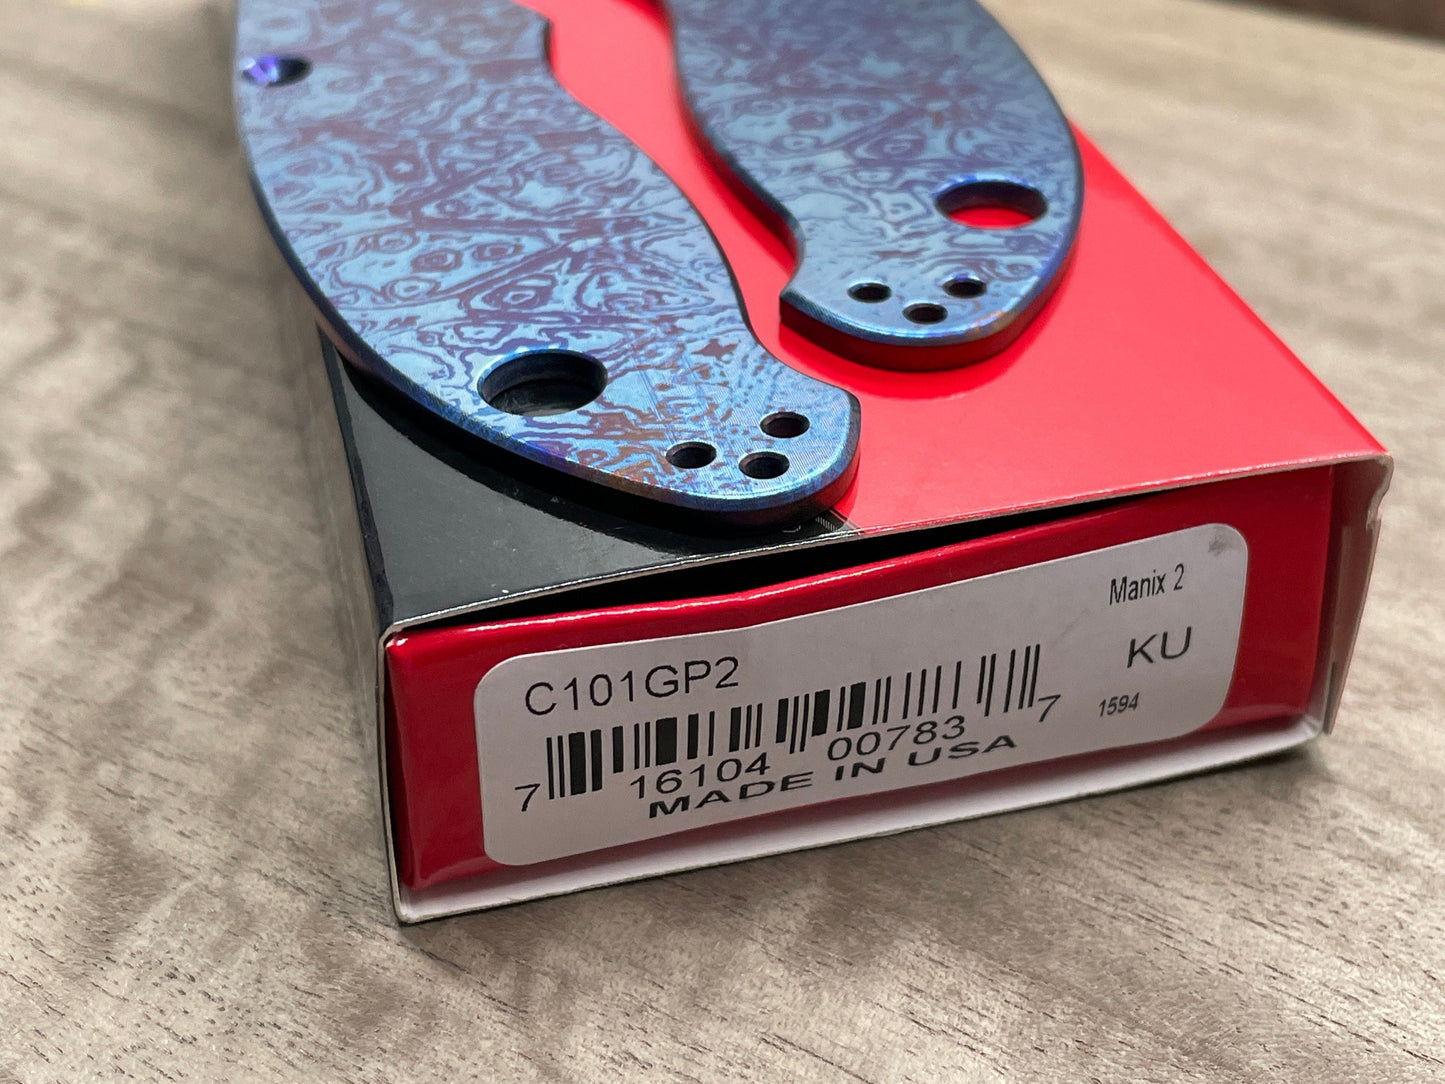 COMPASS engraved Copper scales for Spyderco MANIX 2